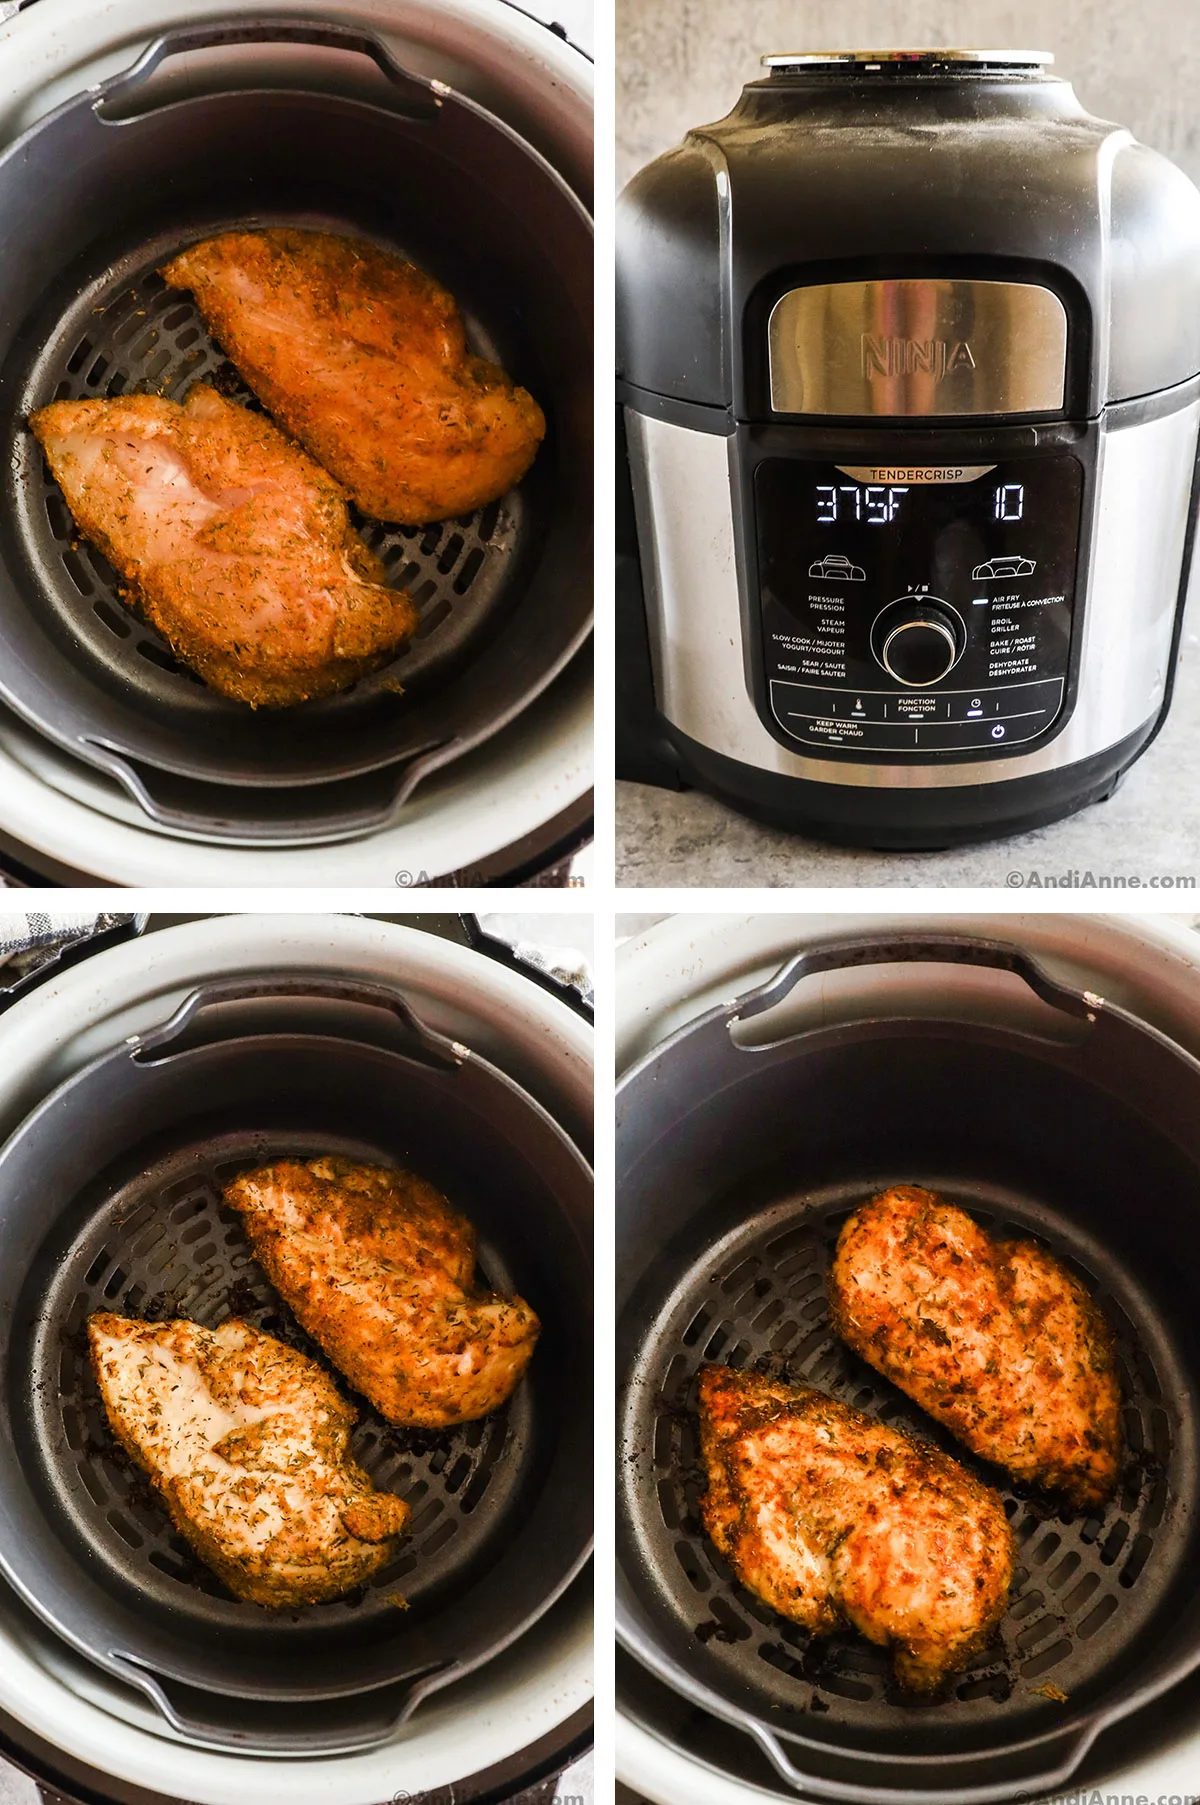 Four images of an air fryer cooking two chicken breasts covered in spices.